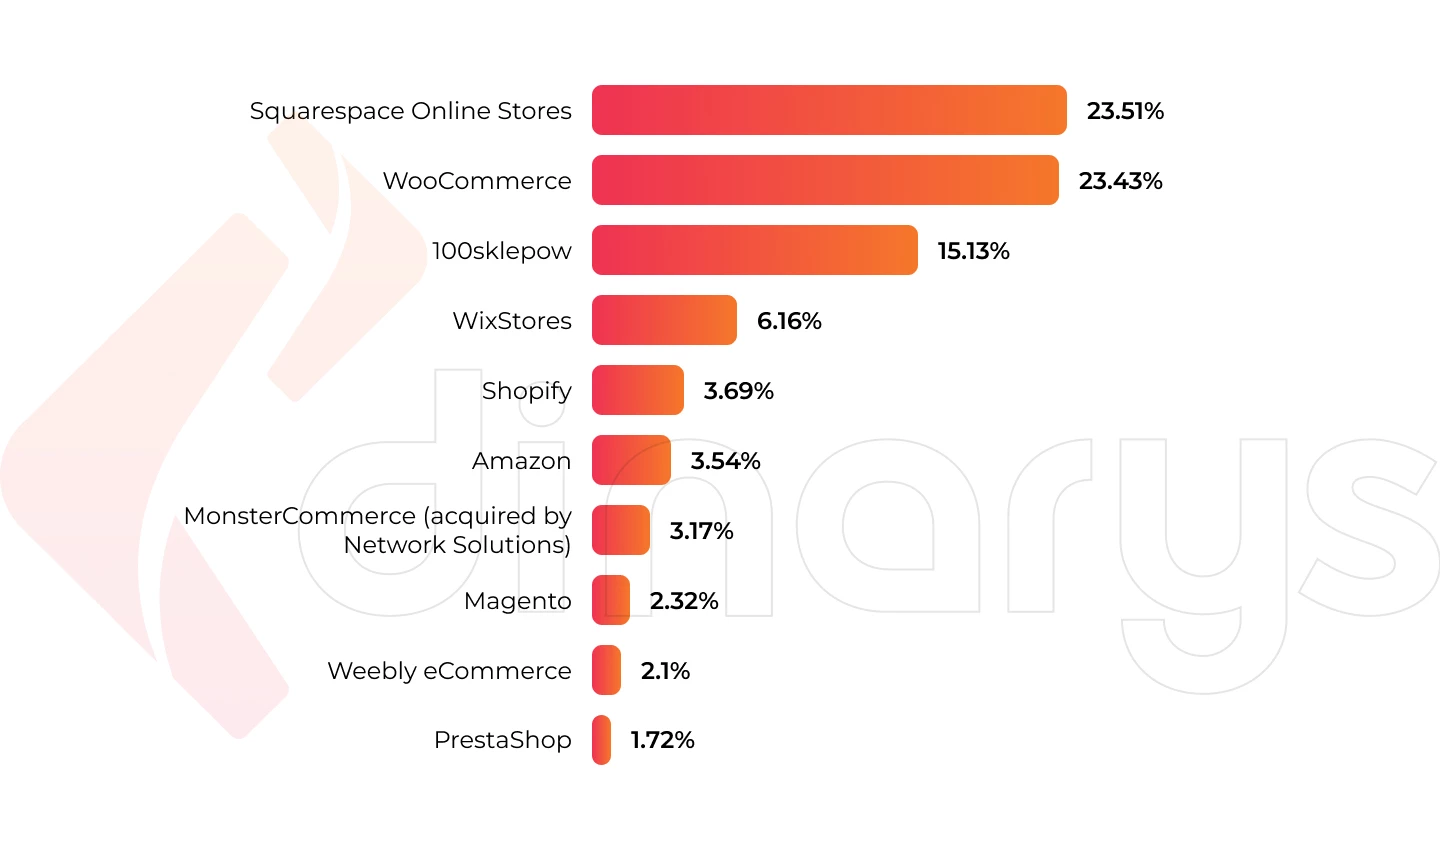 Magento is now among TOP 10 most popular e-commerce platforms in the world